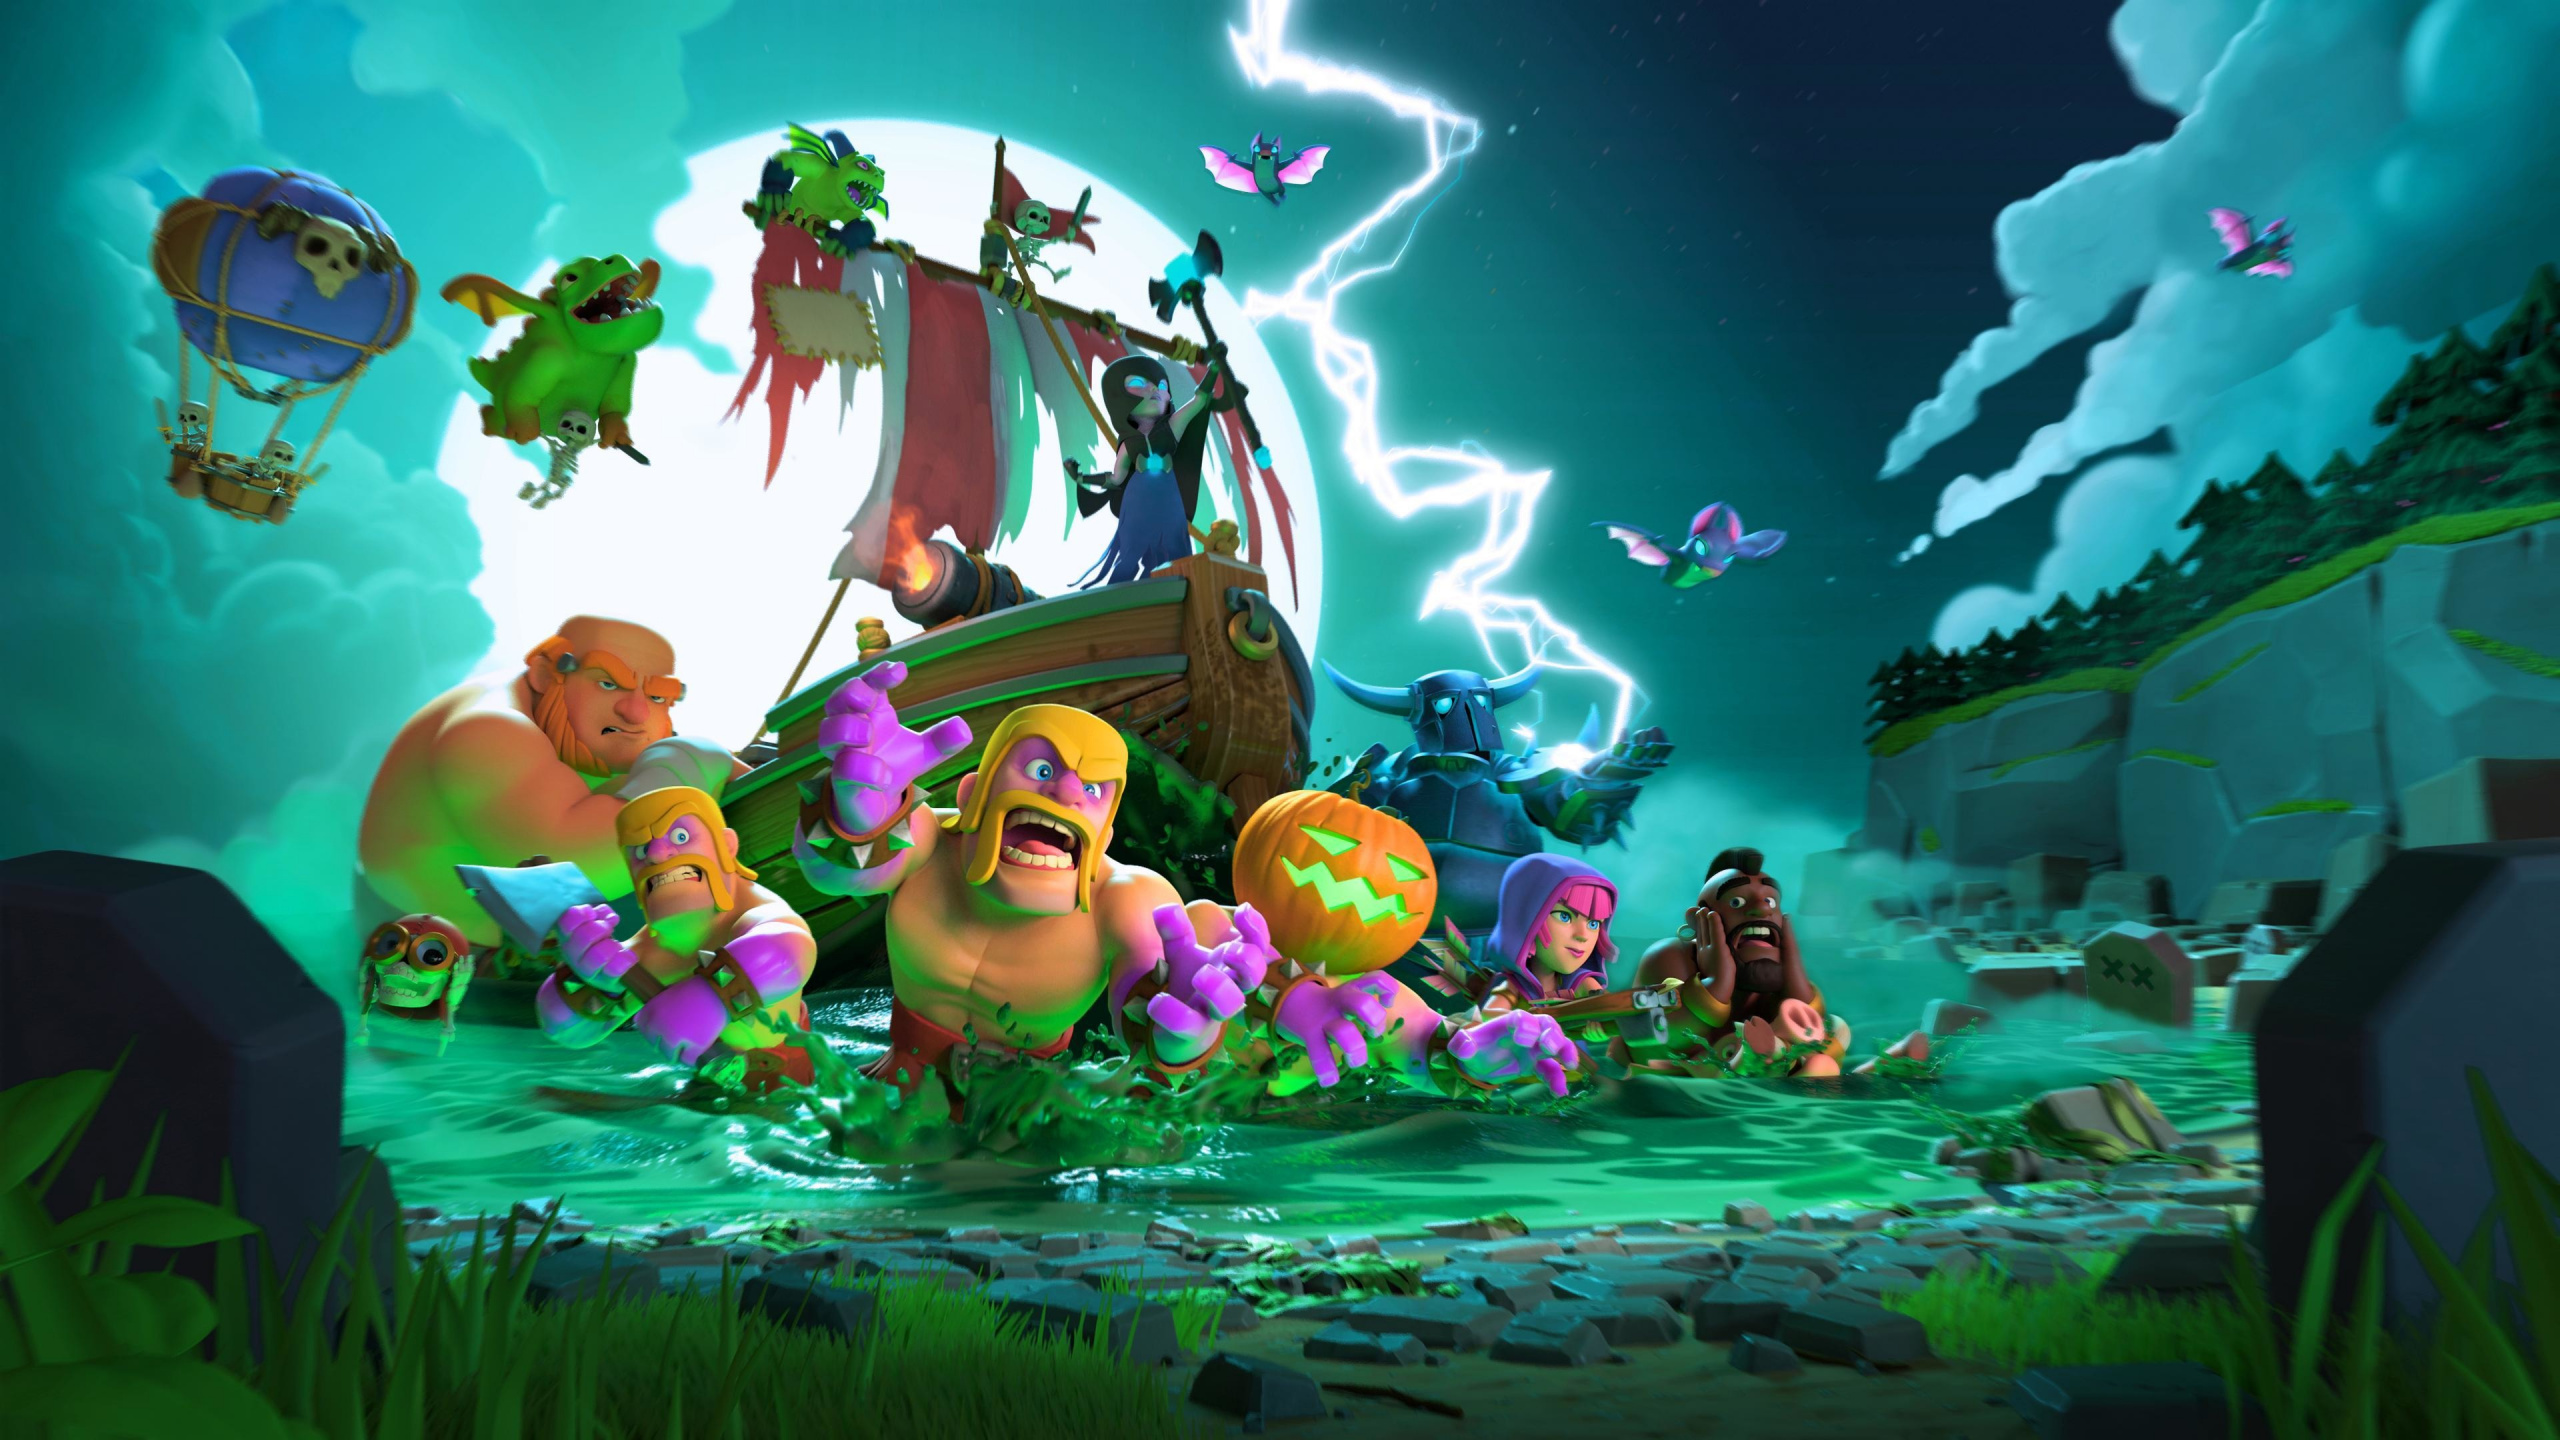 Clash Of Clans, Mobile Game, Halloween, Wallpaper - Clash Of Clans 4k - HD Wallpaper 